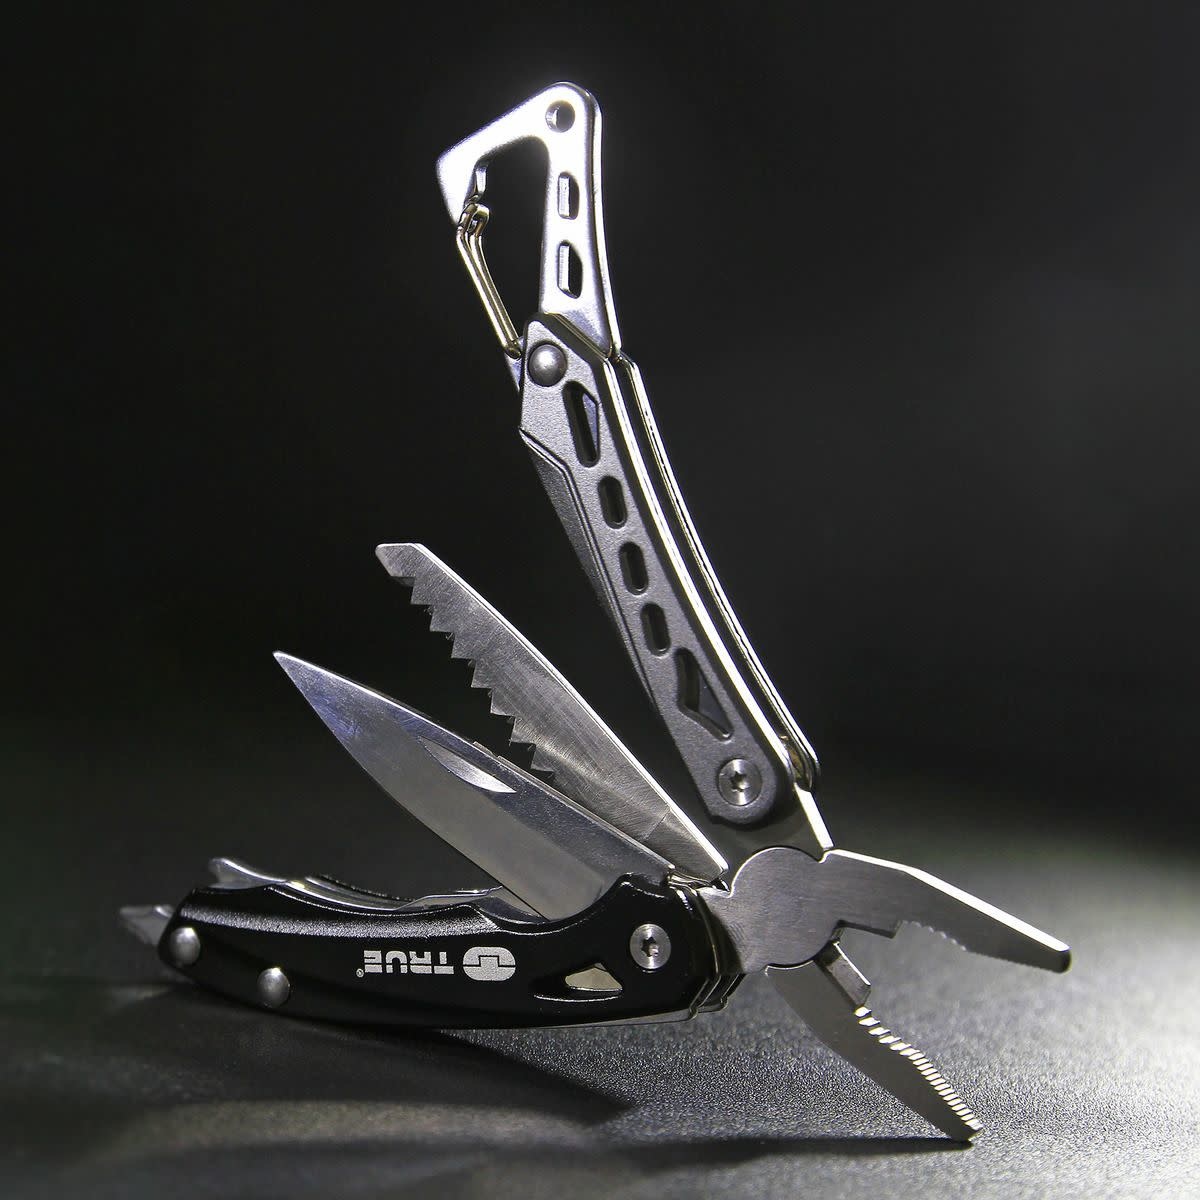  True Utility TU180 Seven - Seven Essential Functions Compact  Multitool : Everything Else